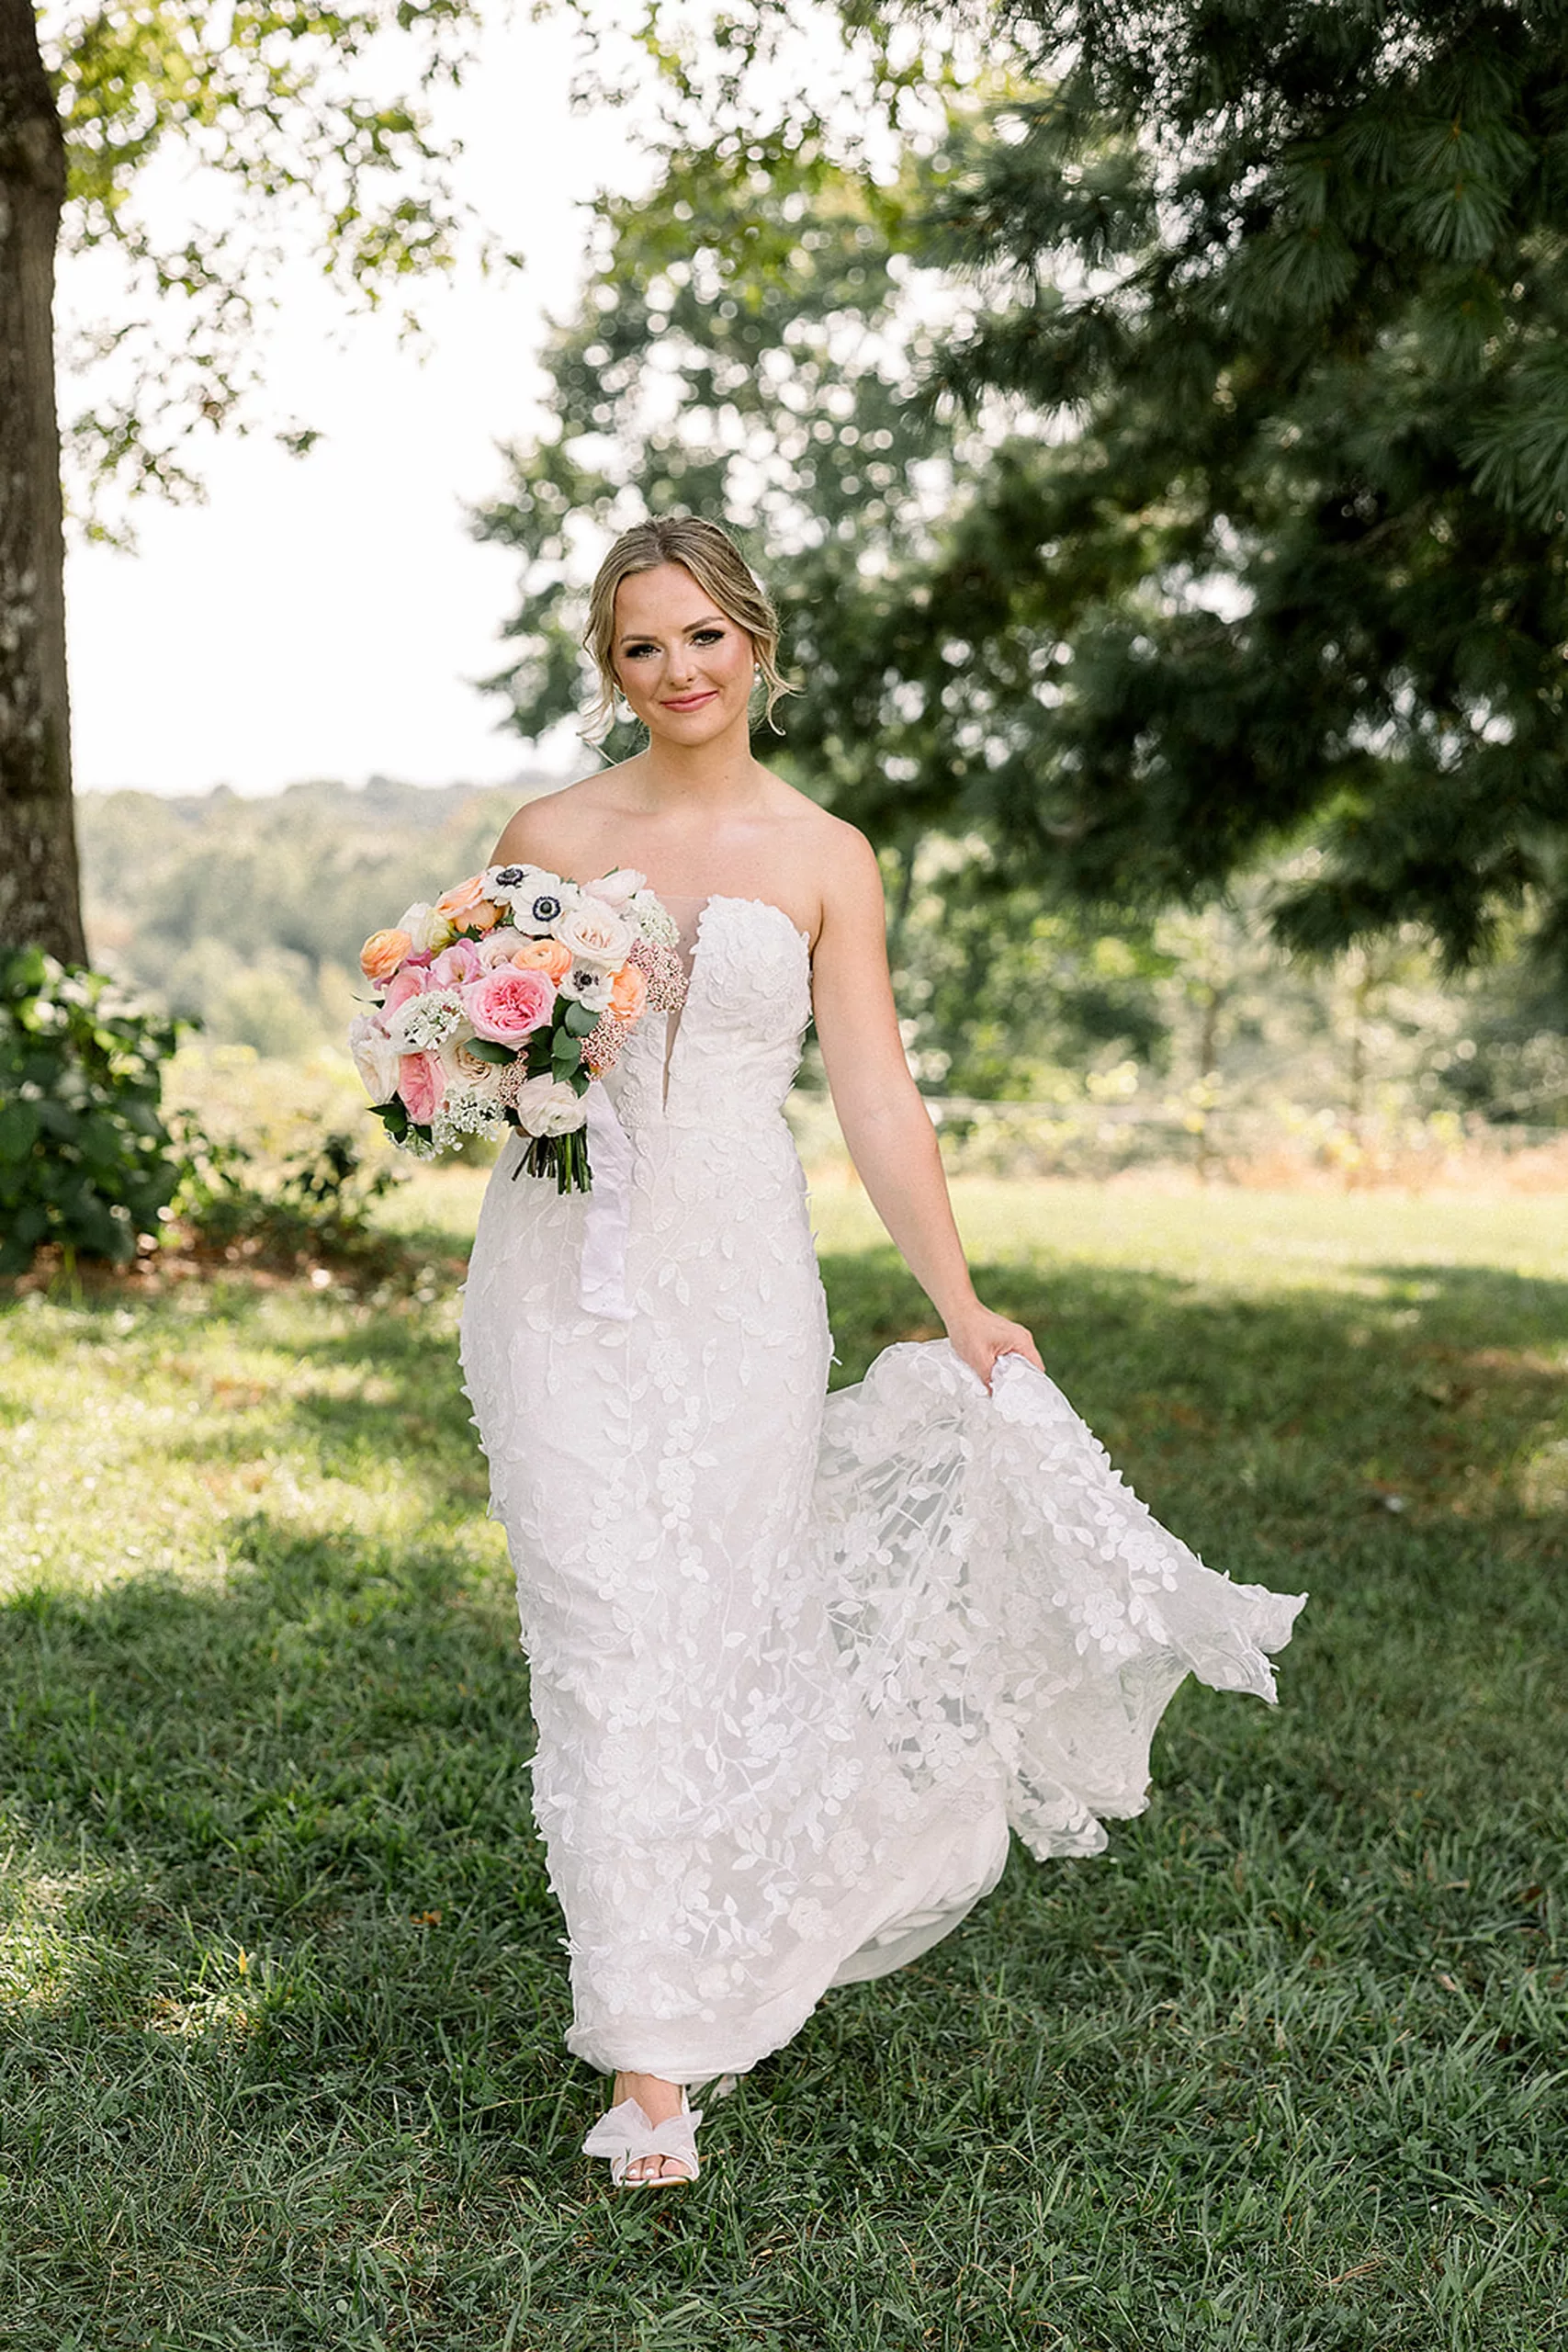 A bride walks through a grassy field under trees holding her train and her colorful bouquet in a lace dress